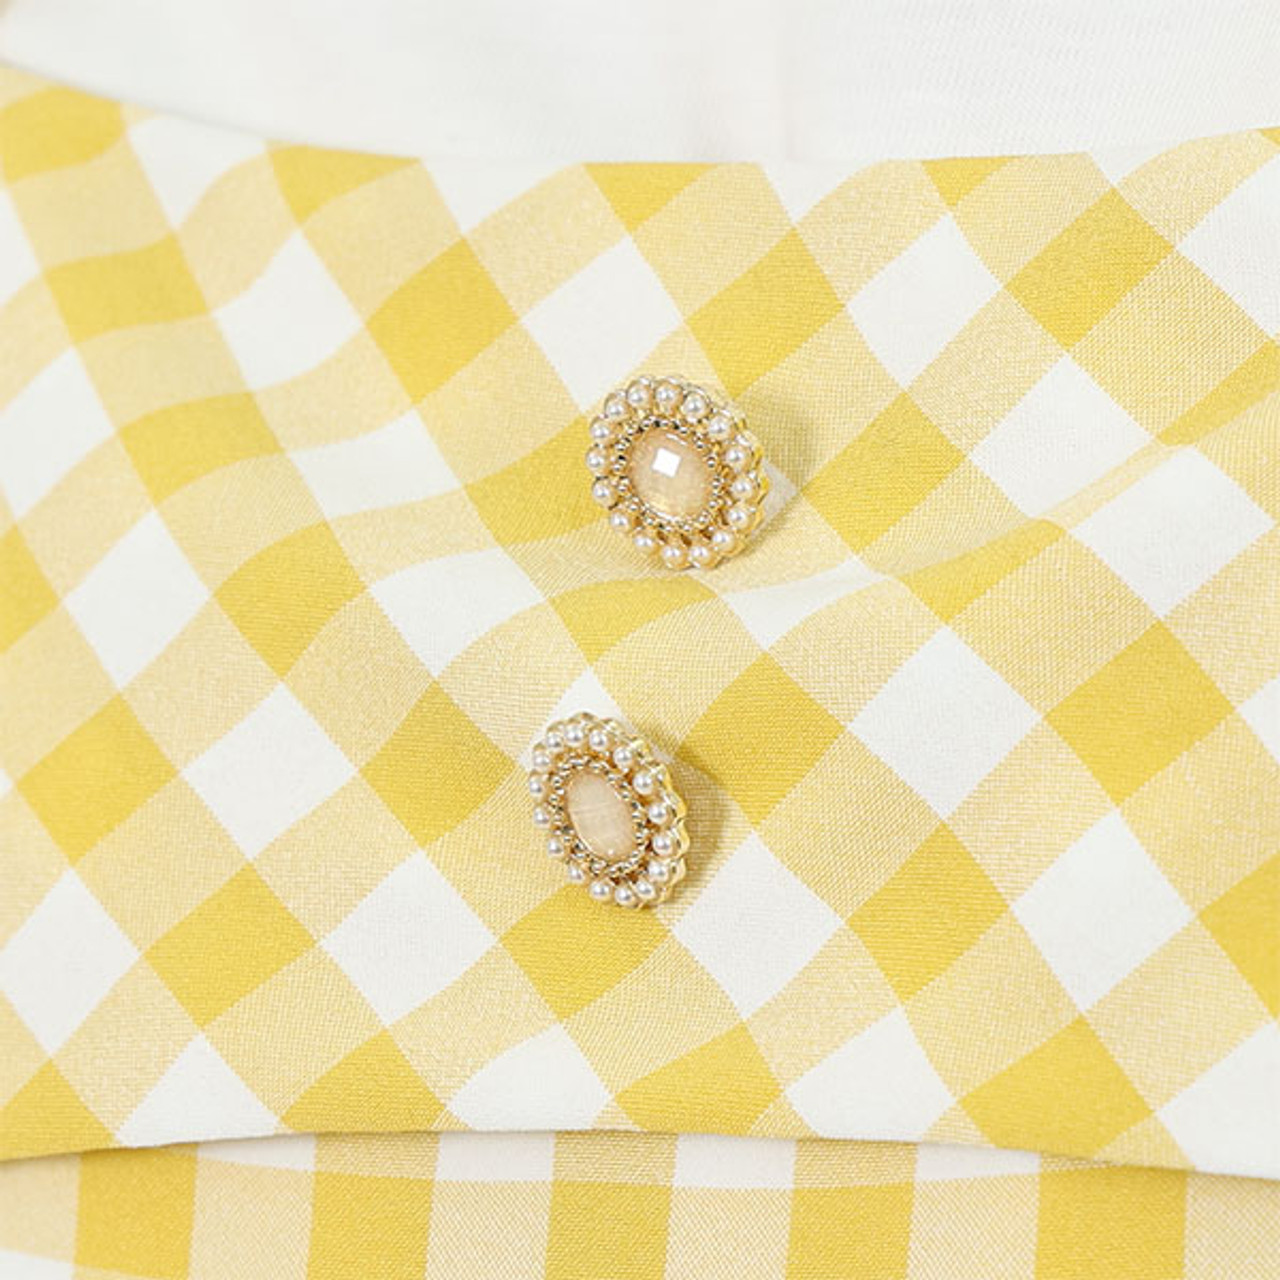 A close up of the buttons on the yellow dress.